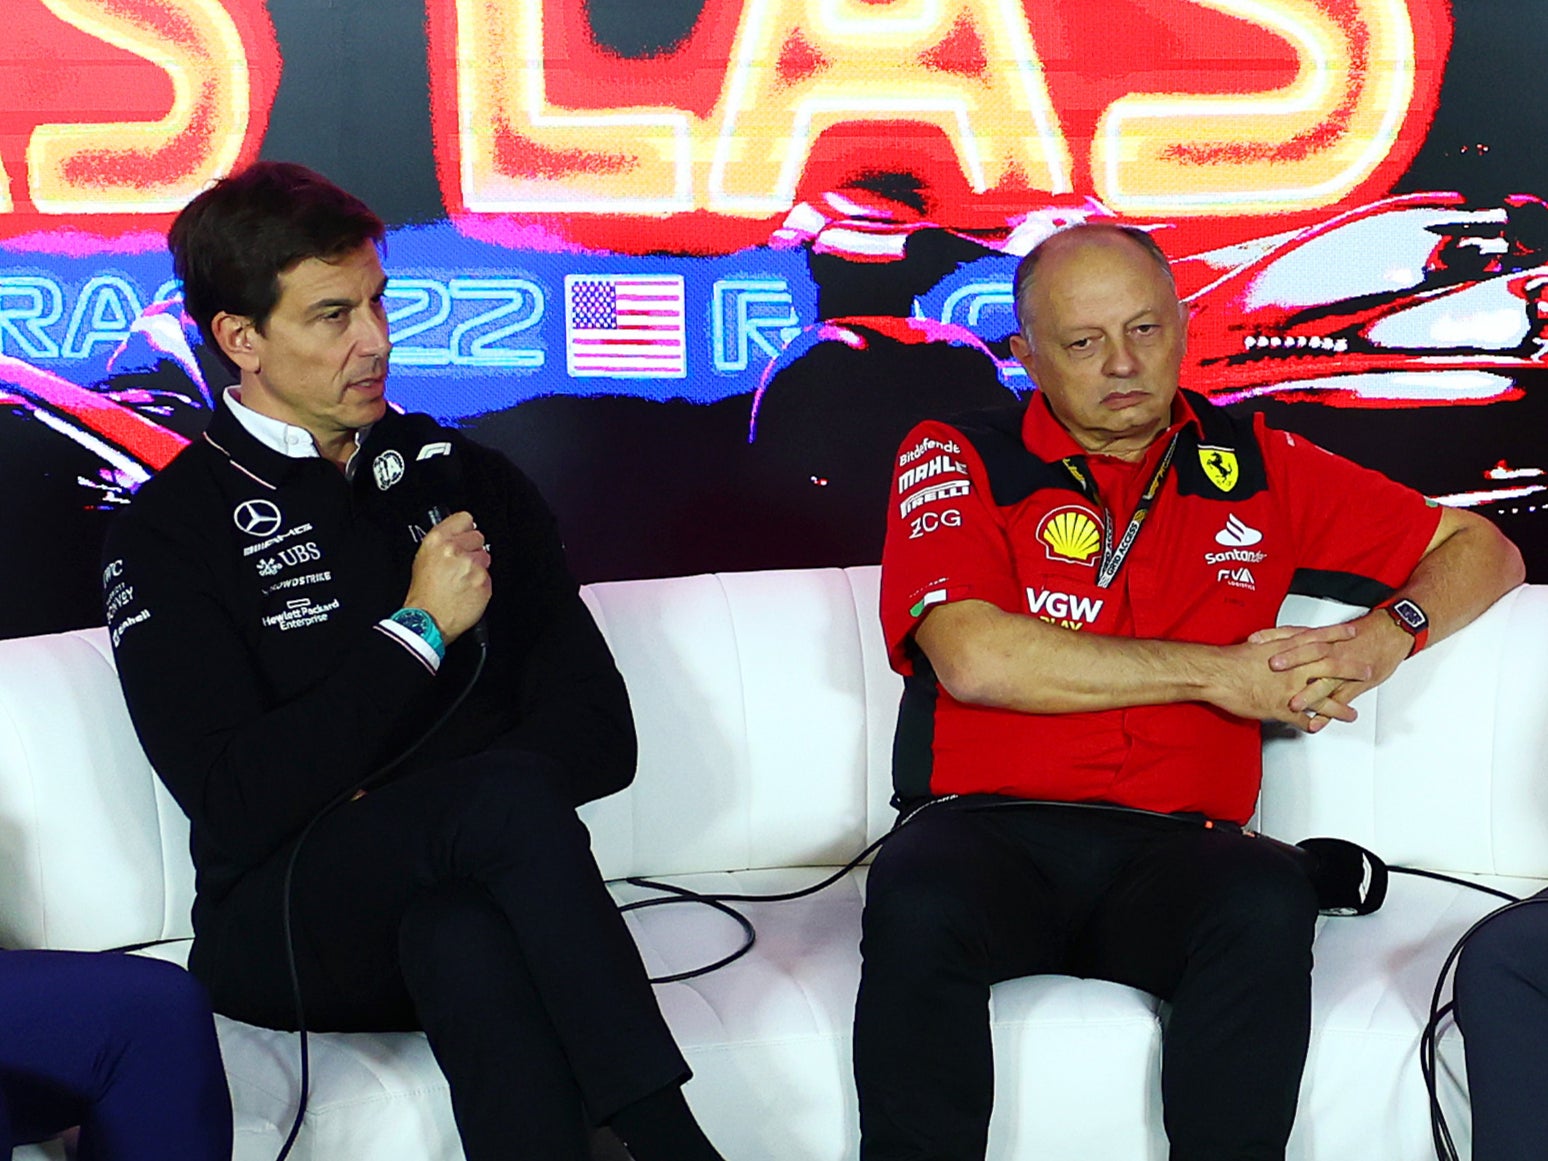 Toto Wolff (left) and Fred Vasseur (right) were given formal warnings by the stewards in Abu Dhabi